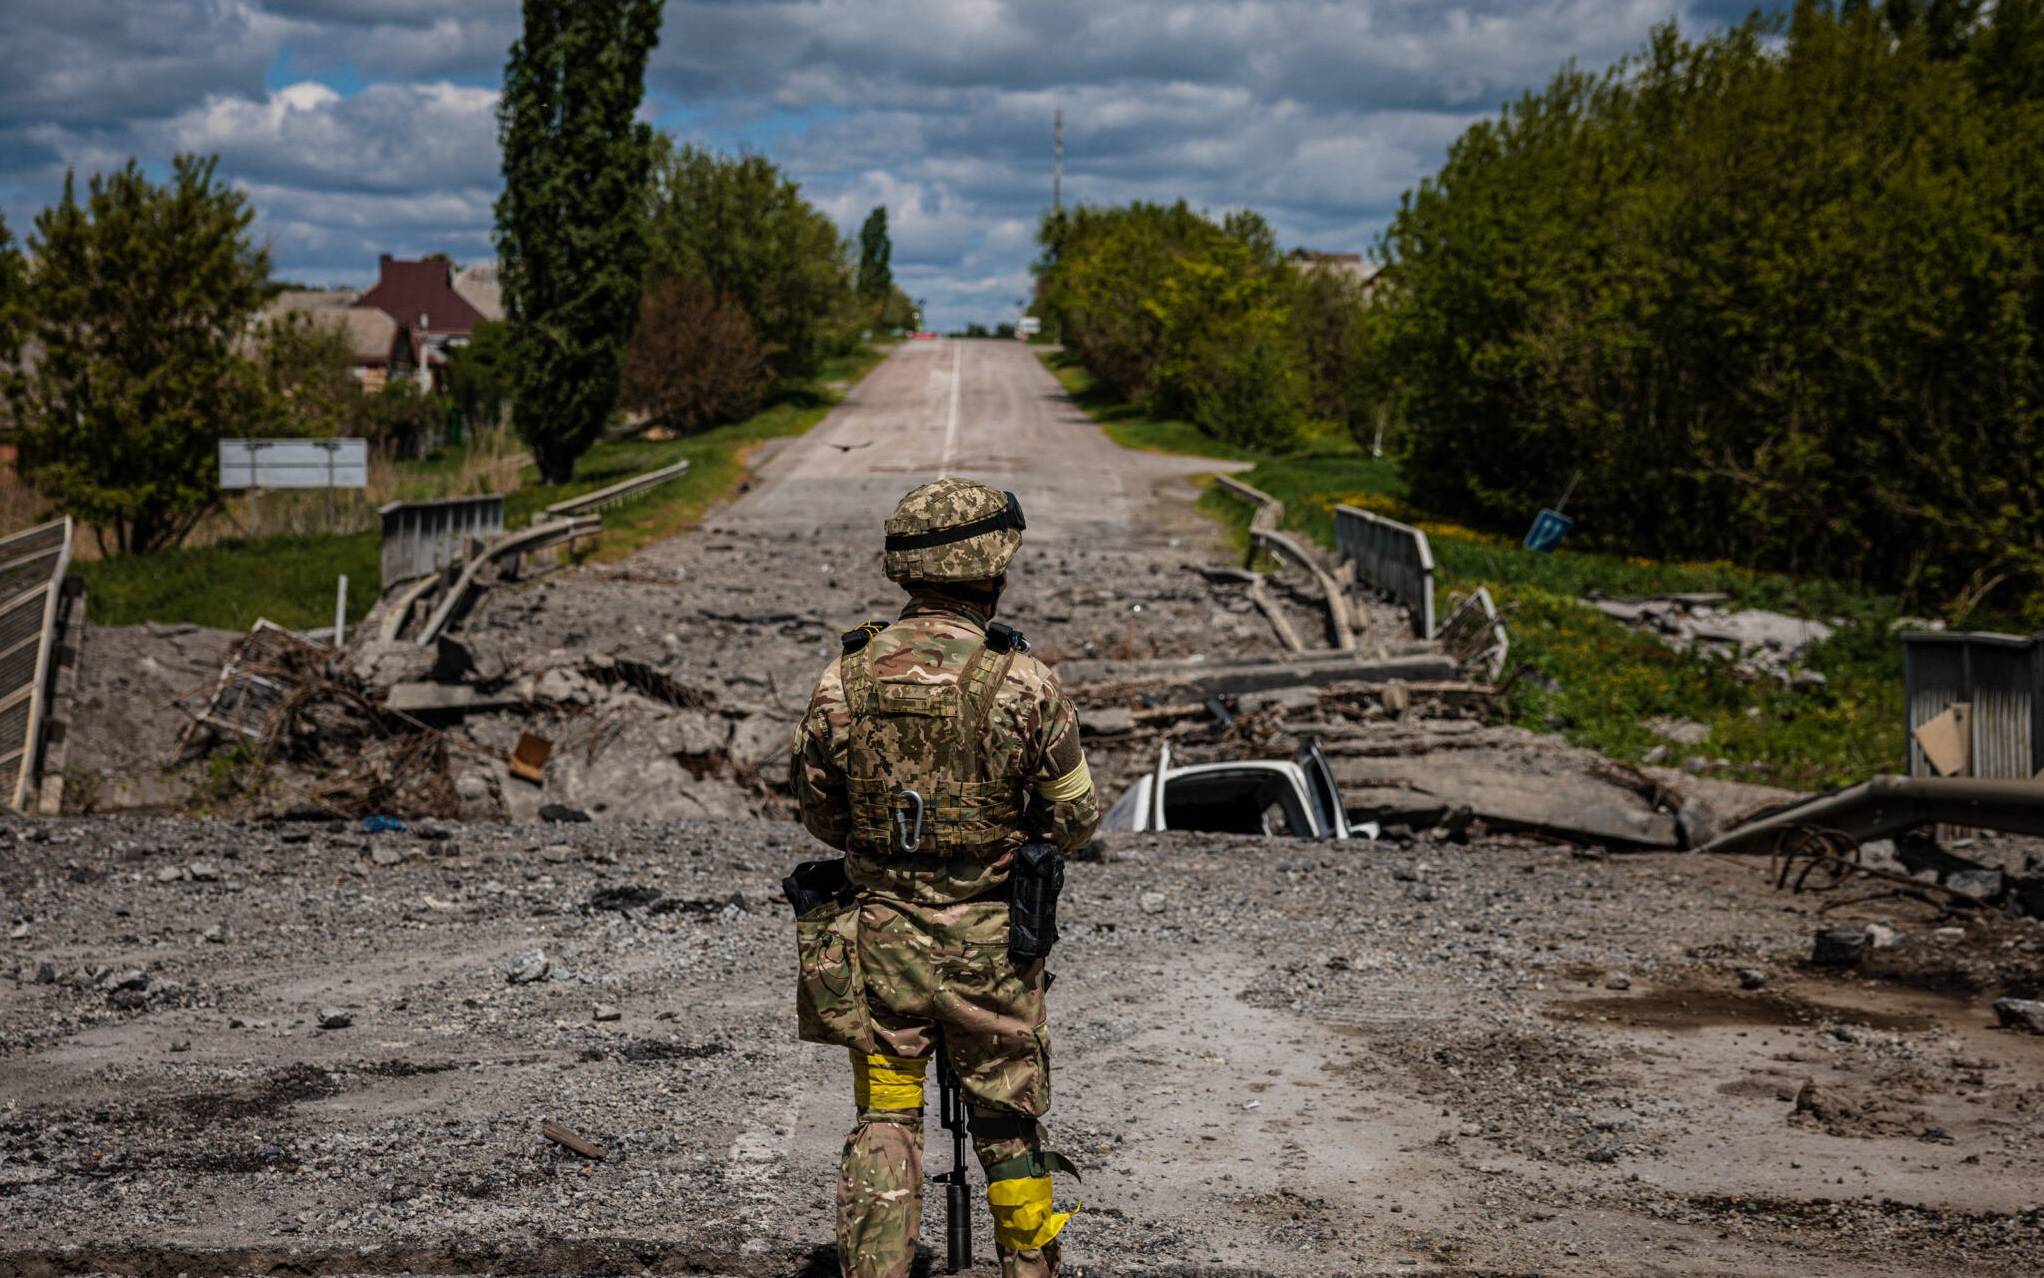 A soldier of the Kraken Ukrainian special forces unit observes the area at a destroyed bridge on the road near the village of Rus'ka Lozova, north of Kharkiv, on May 16, 2022. - Ukraine has said its troops have regained control of territory on the Russian border near the country's second-largest city of Kharkiv, which has been under constant fire since Moscow's invasion began. (Photo by Dimitar DILKOFF / AFP)